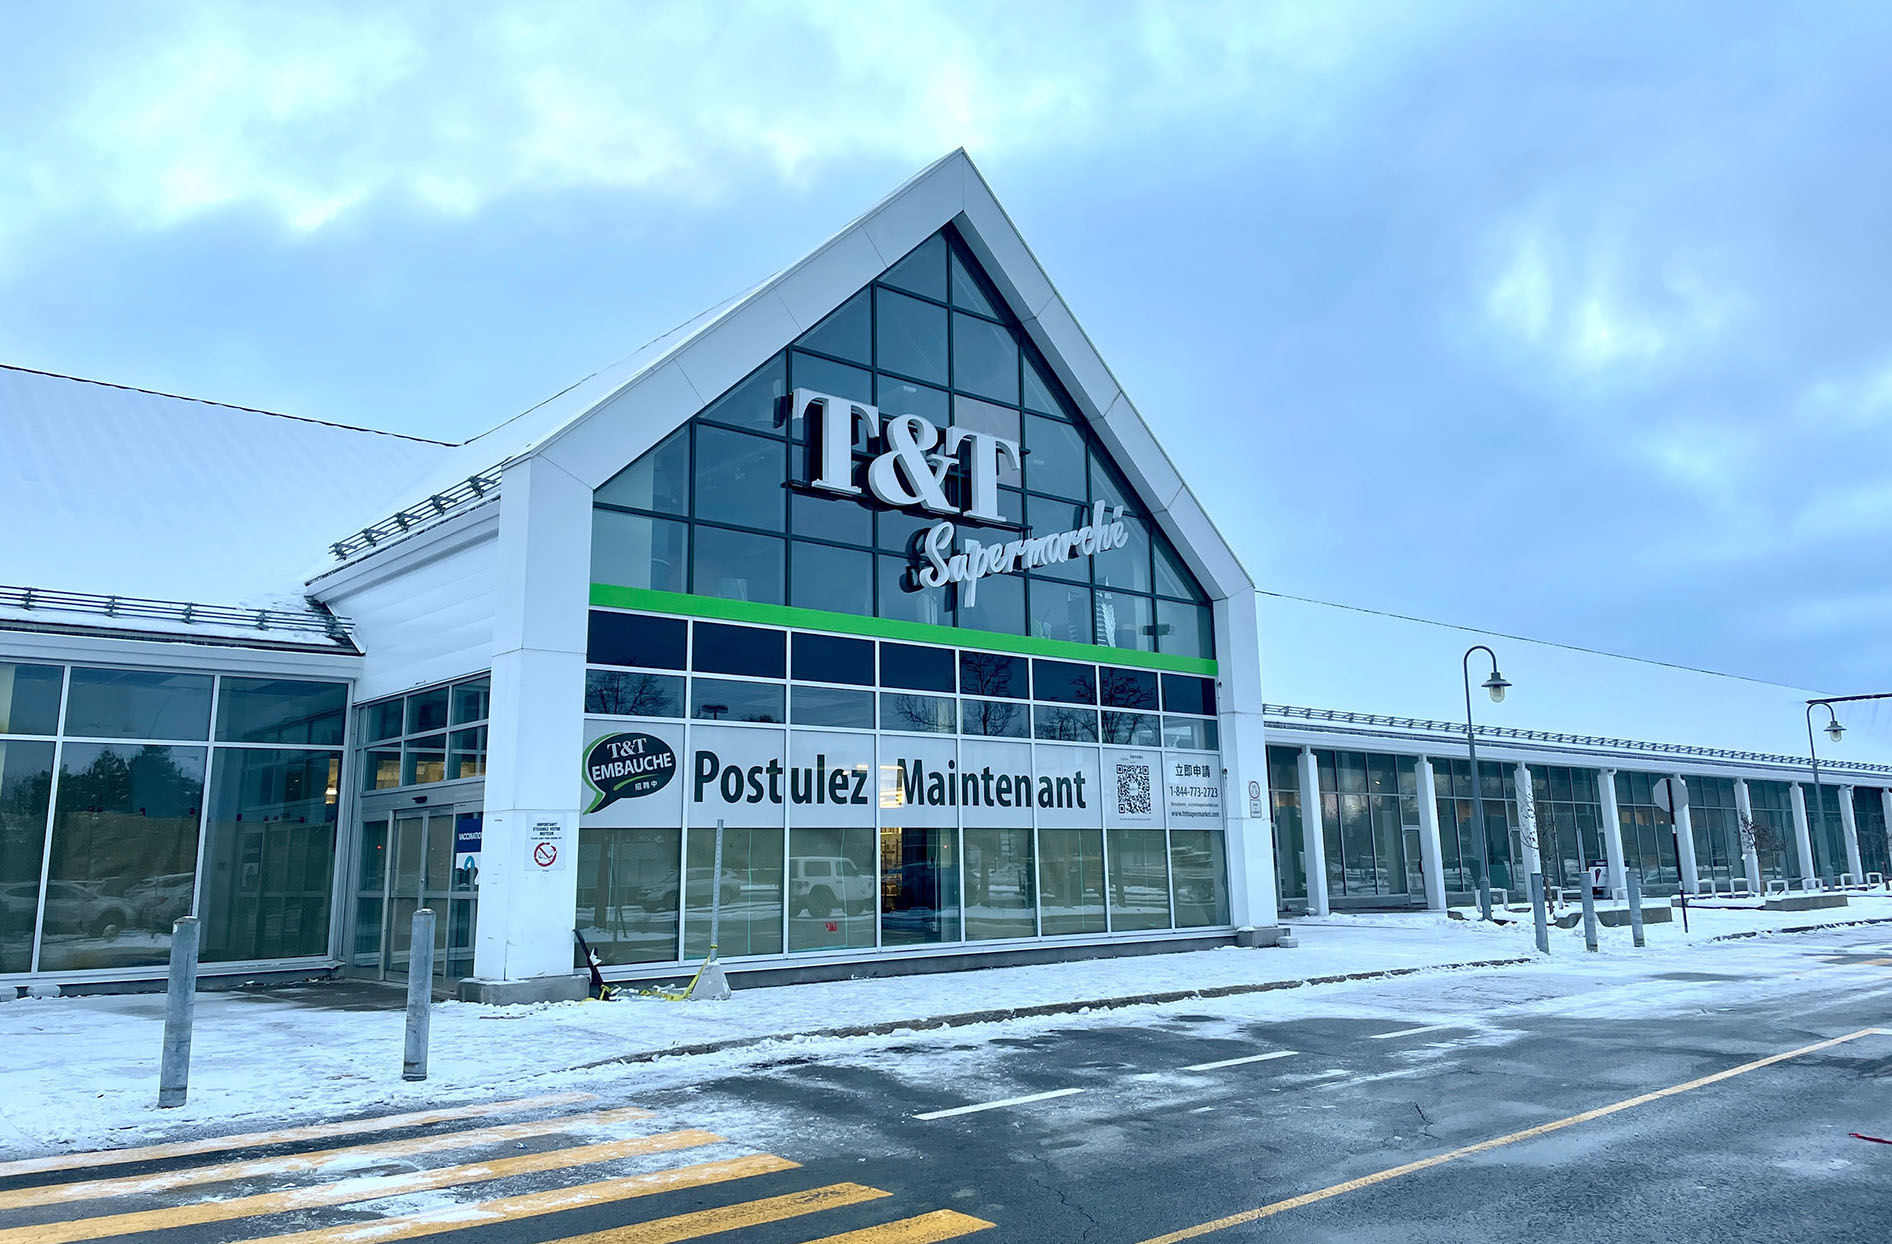 An exterior shot of the new T&T supermarket in Montreal, Quebec.